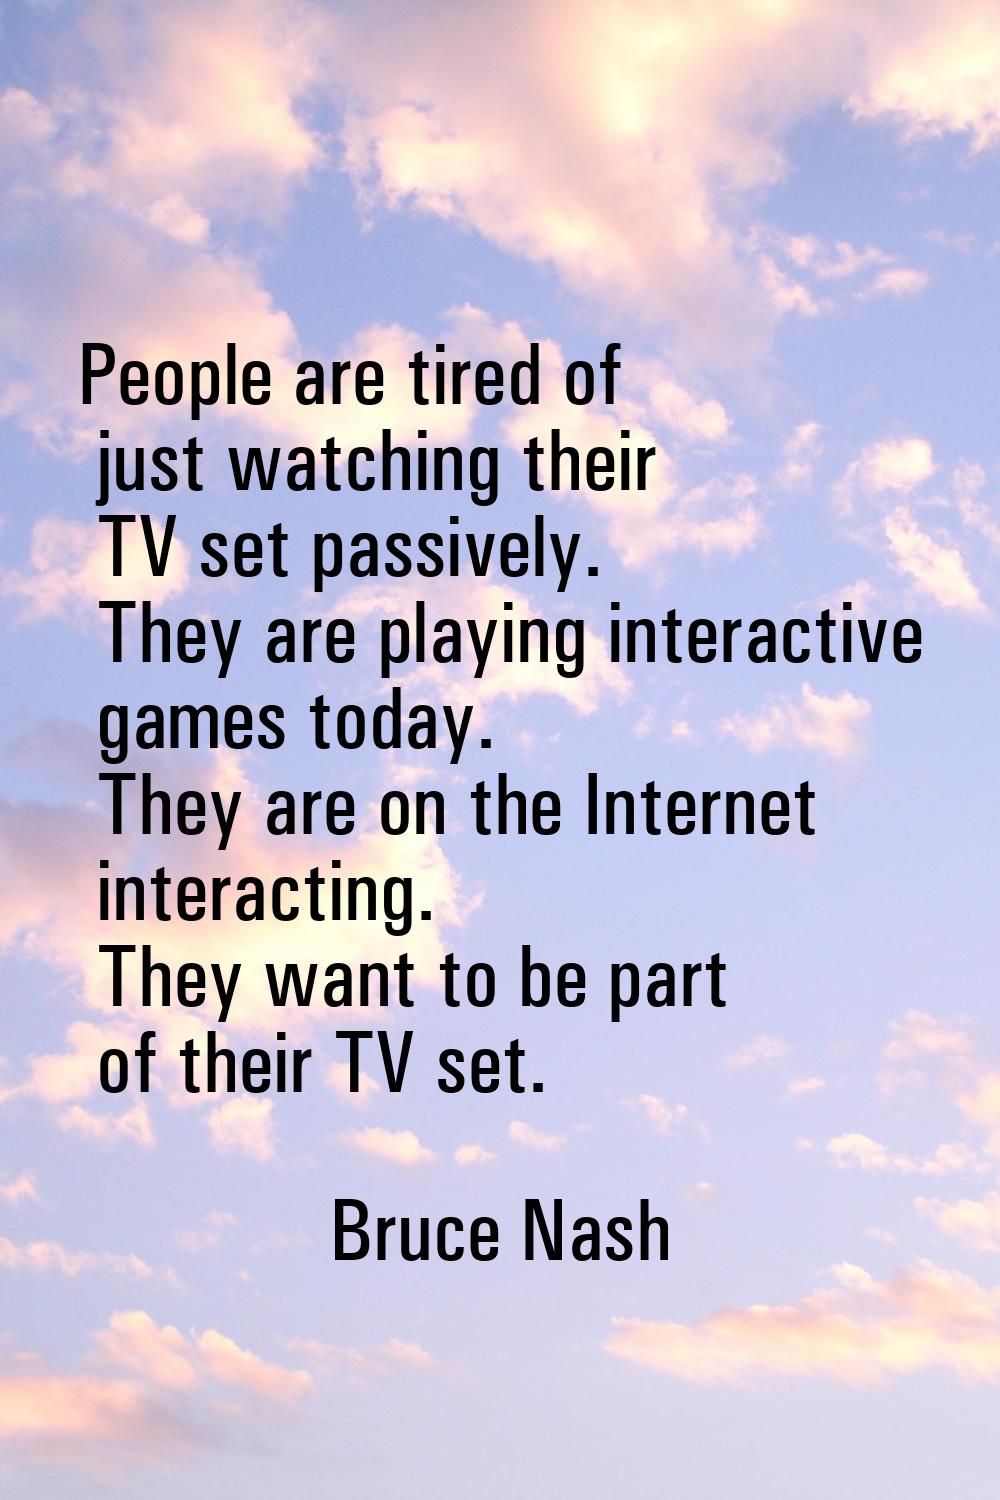 People are tired of just watching their TV set passively. They are playing interactive games today.